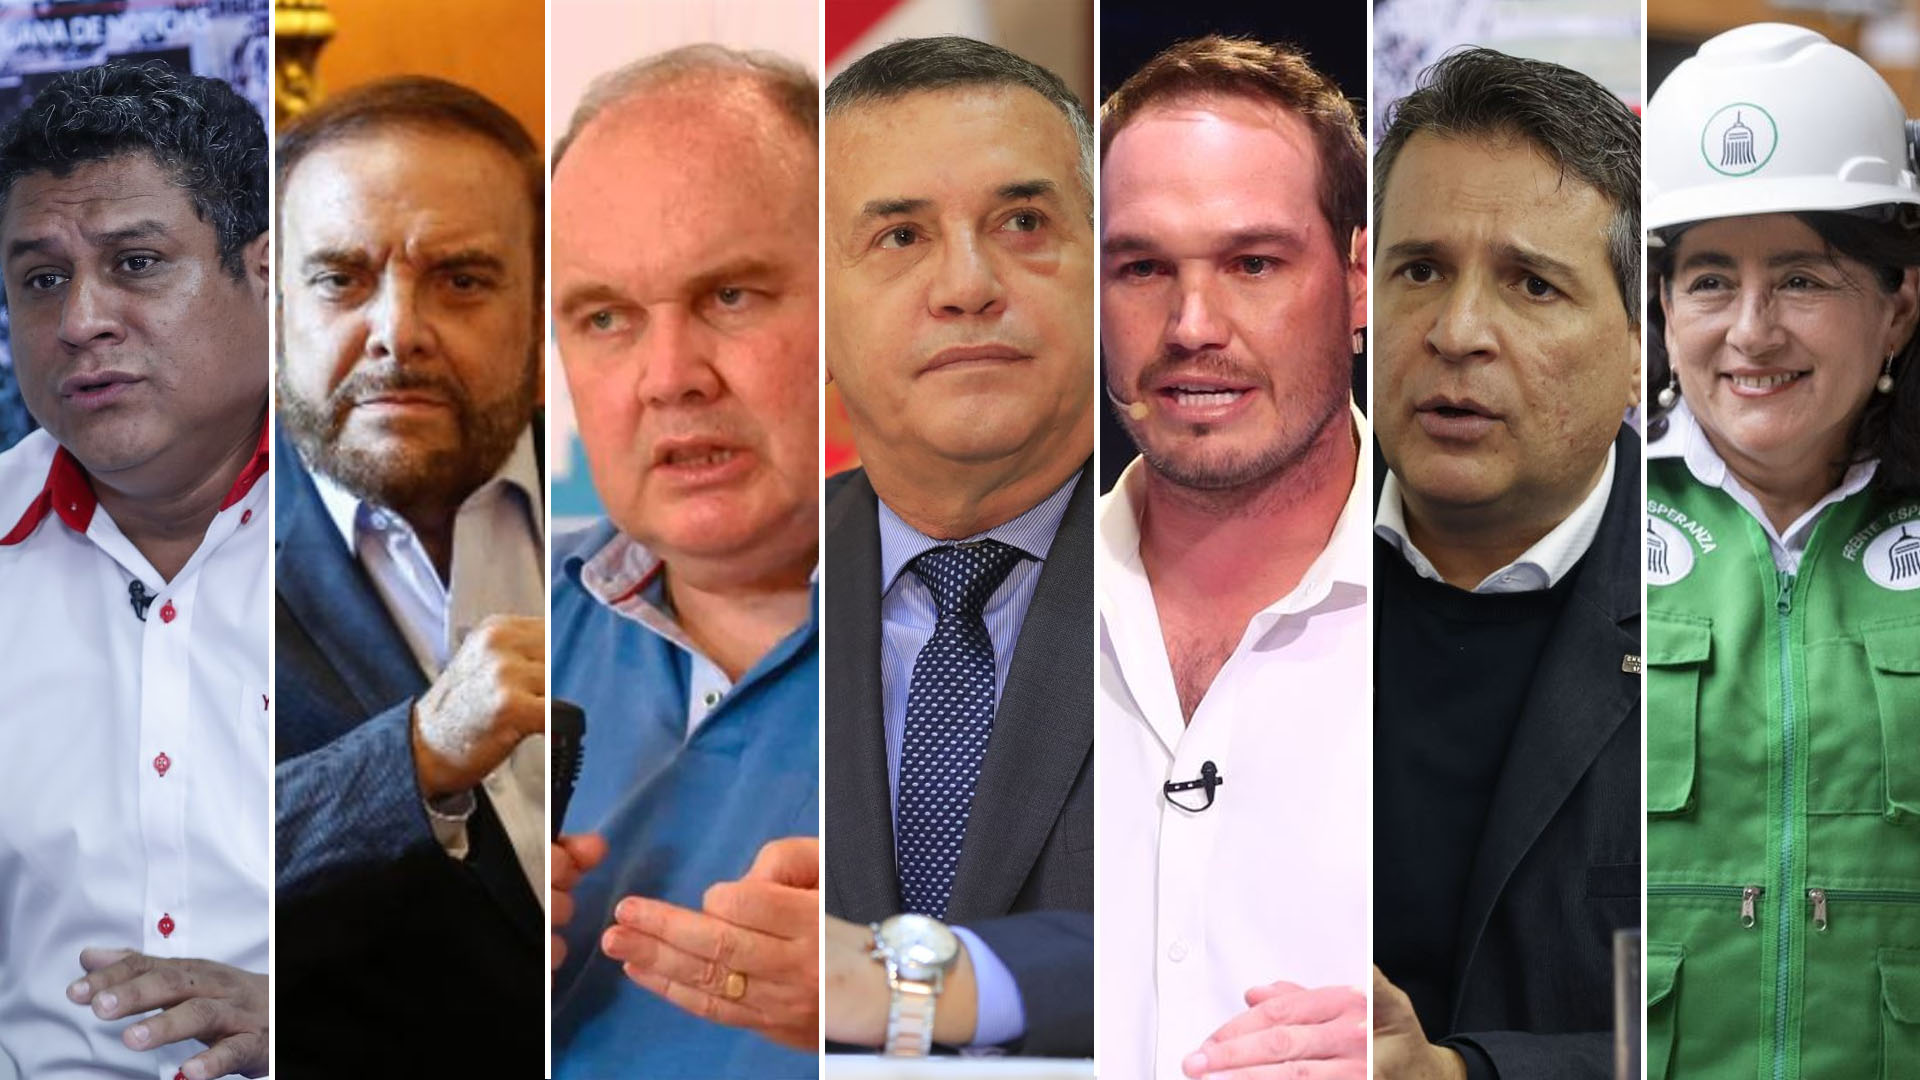 The 7 candidates for the mayoralty of Lima.